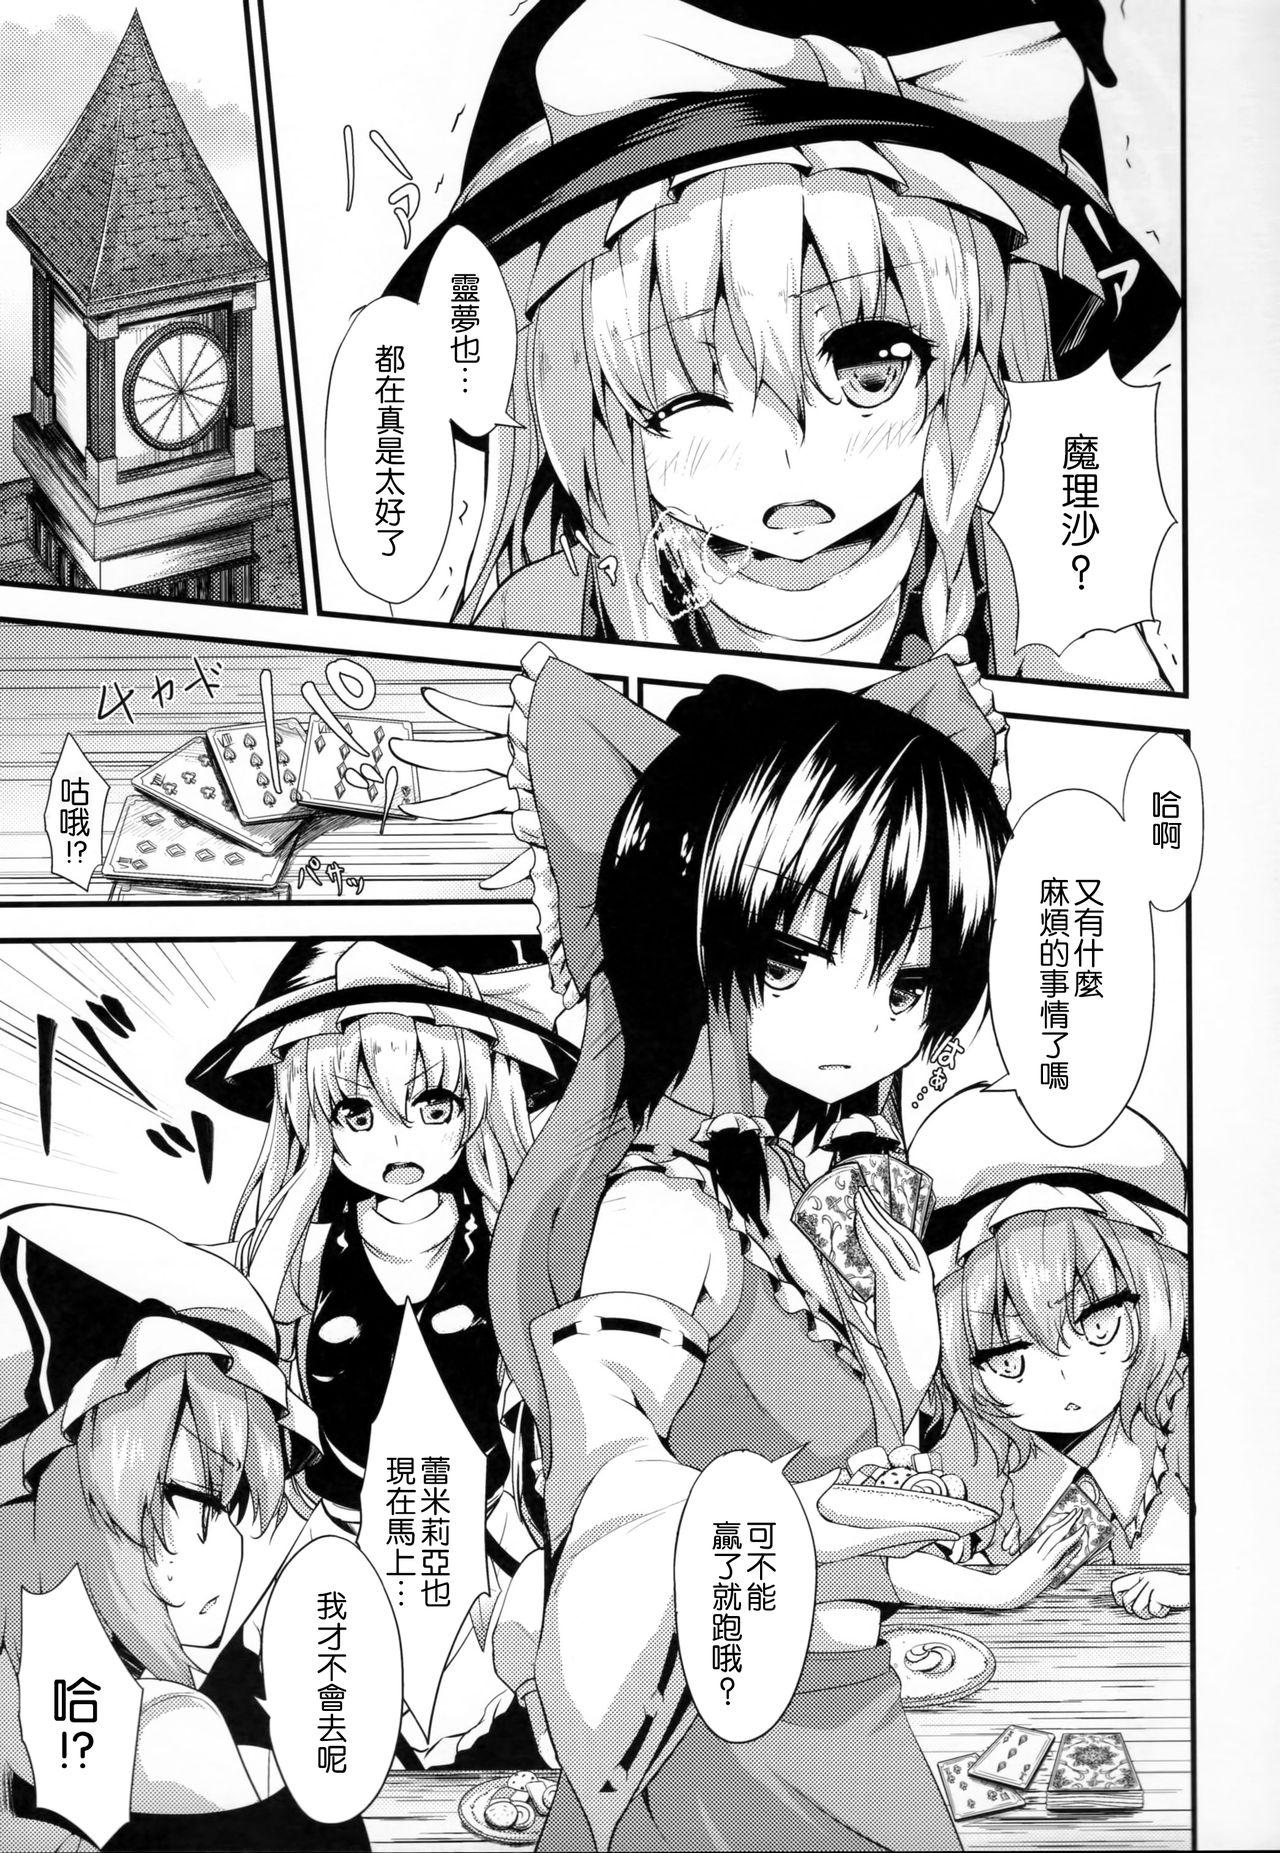 She Satanic Carnival a bad dream - Touhou project Family Porn - Page 5